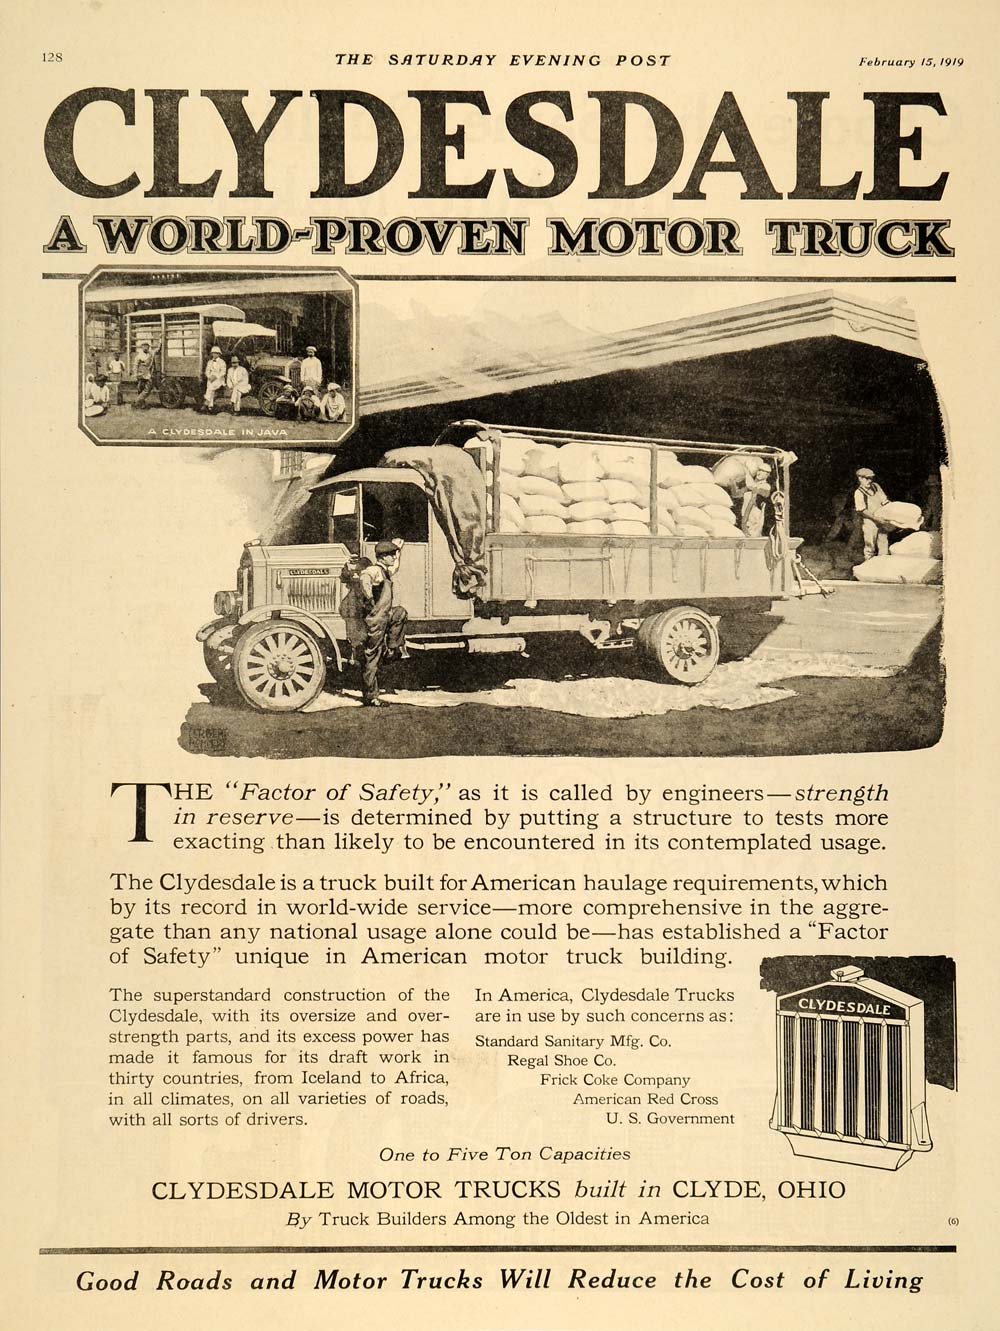 1919 Ad Clydesdale Trucks Hauling Safety Tonnage Ohio - ORIGINAL ADVERTISING TK1